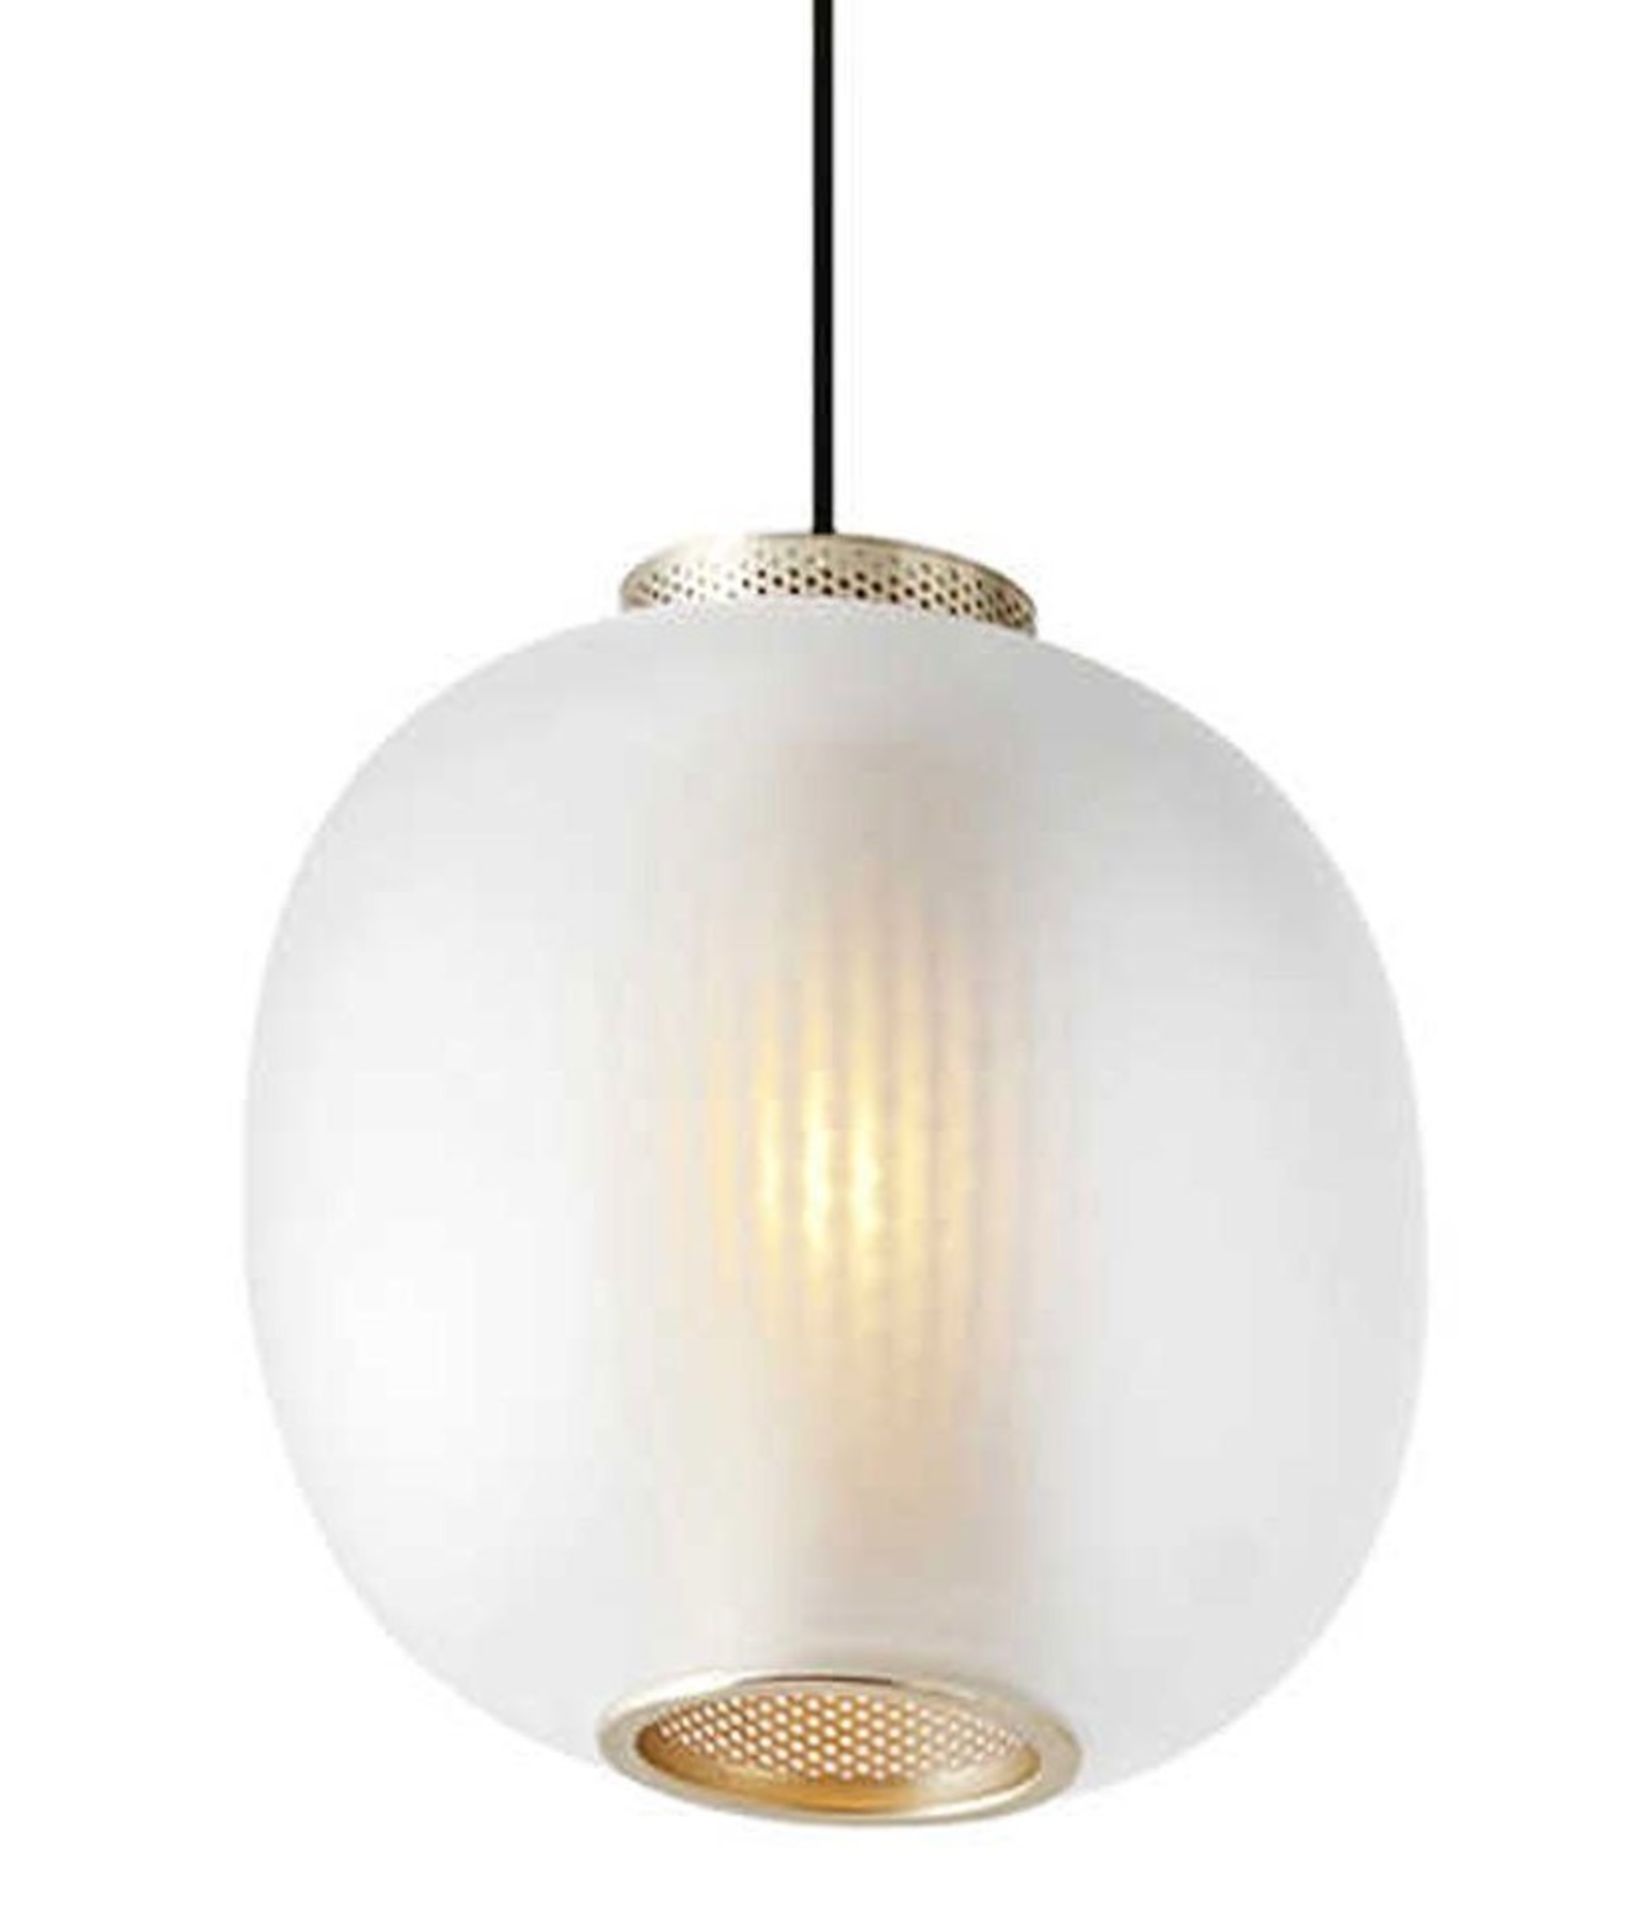 1 x 'Bloom' Pendant Light By Resident - Frosted White Glass - Original RRP £395.00